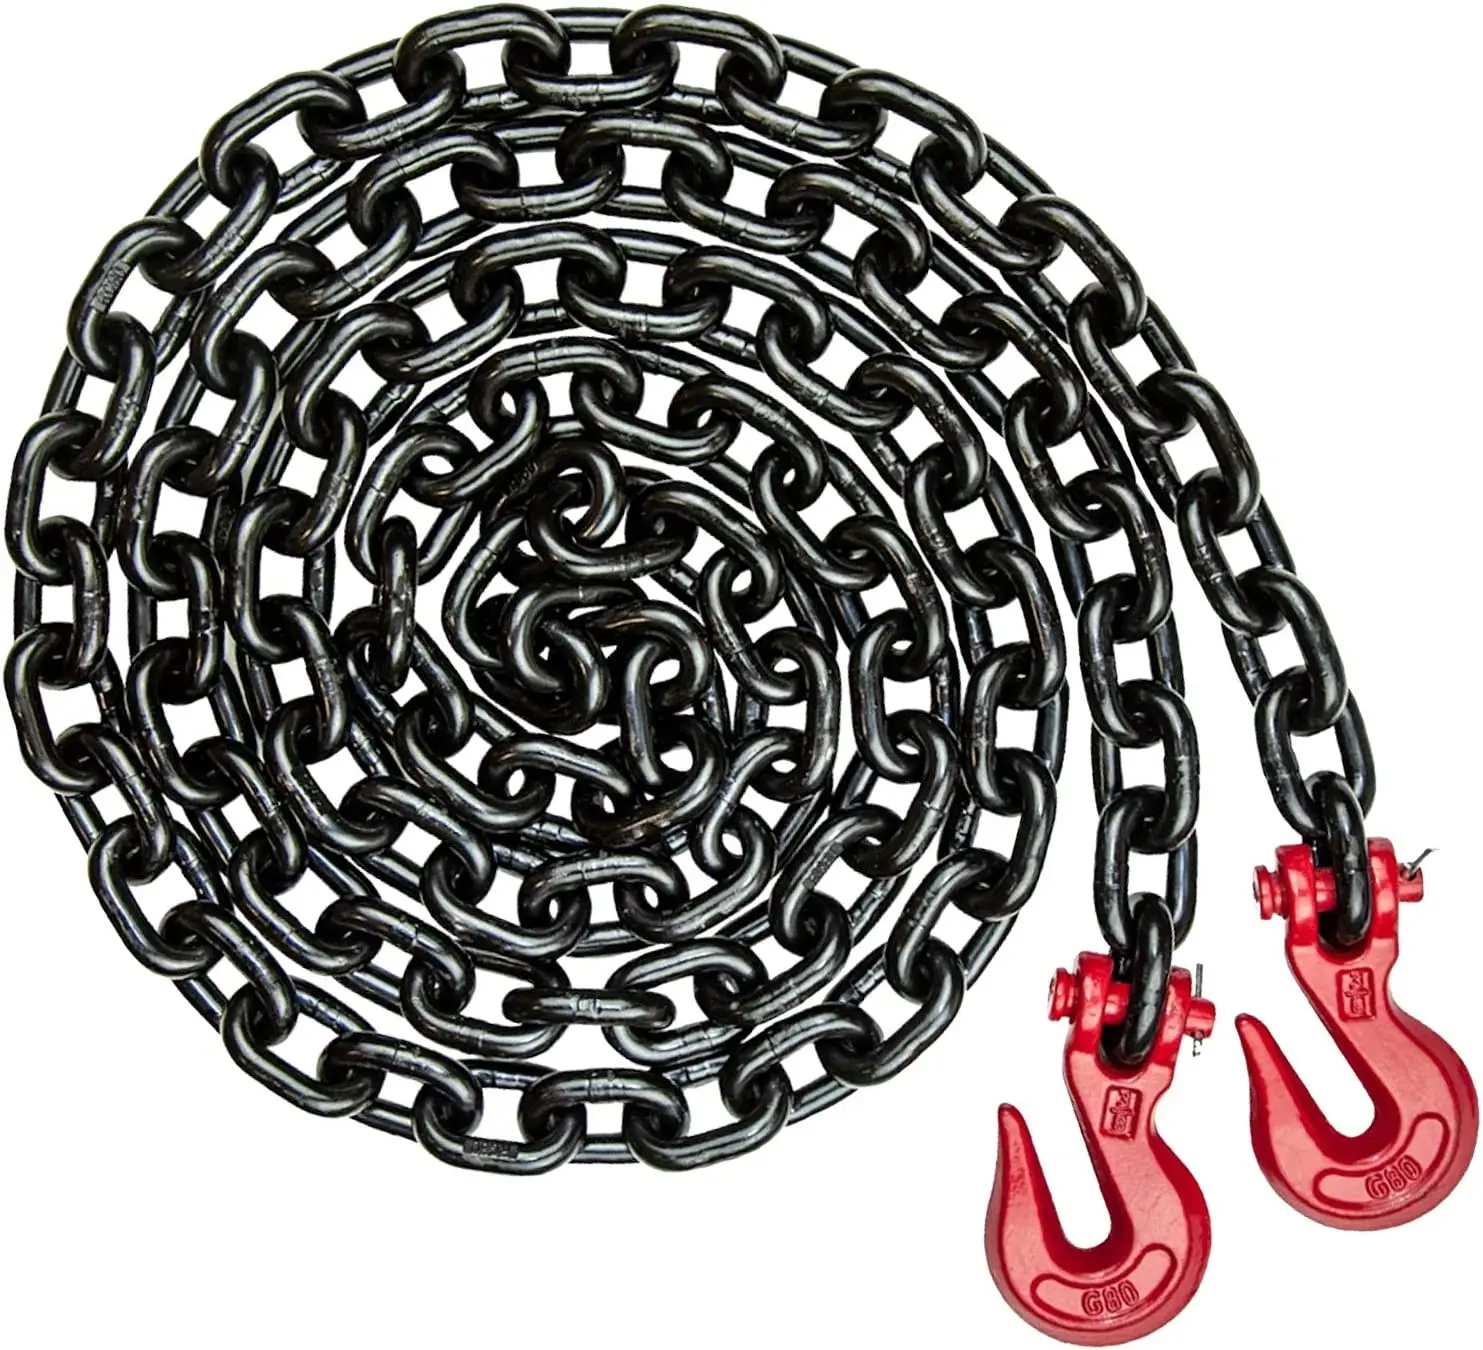 rab Hooks and Adjusters G80 Lifting Sling Chains 5 Ton Capacity, 5FT